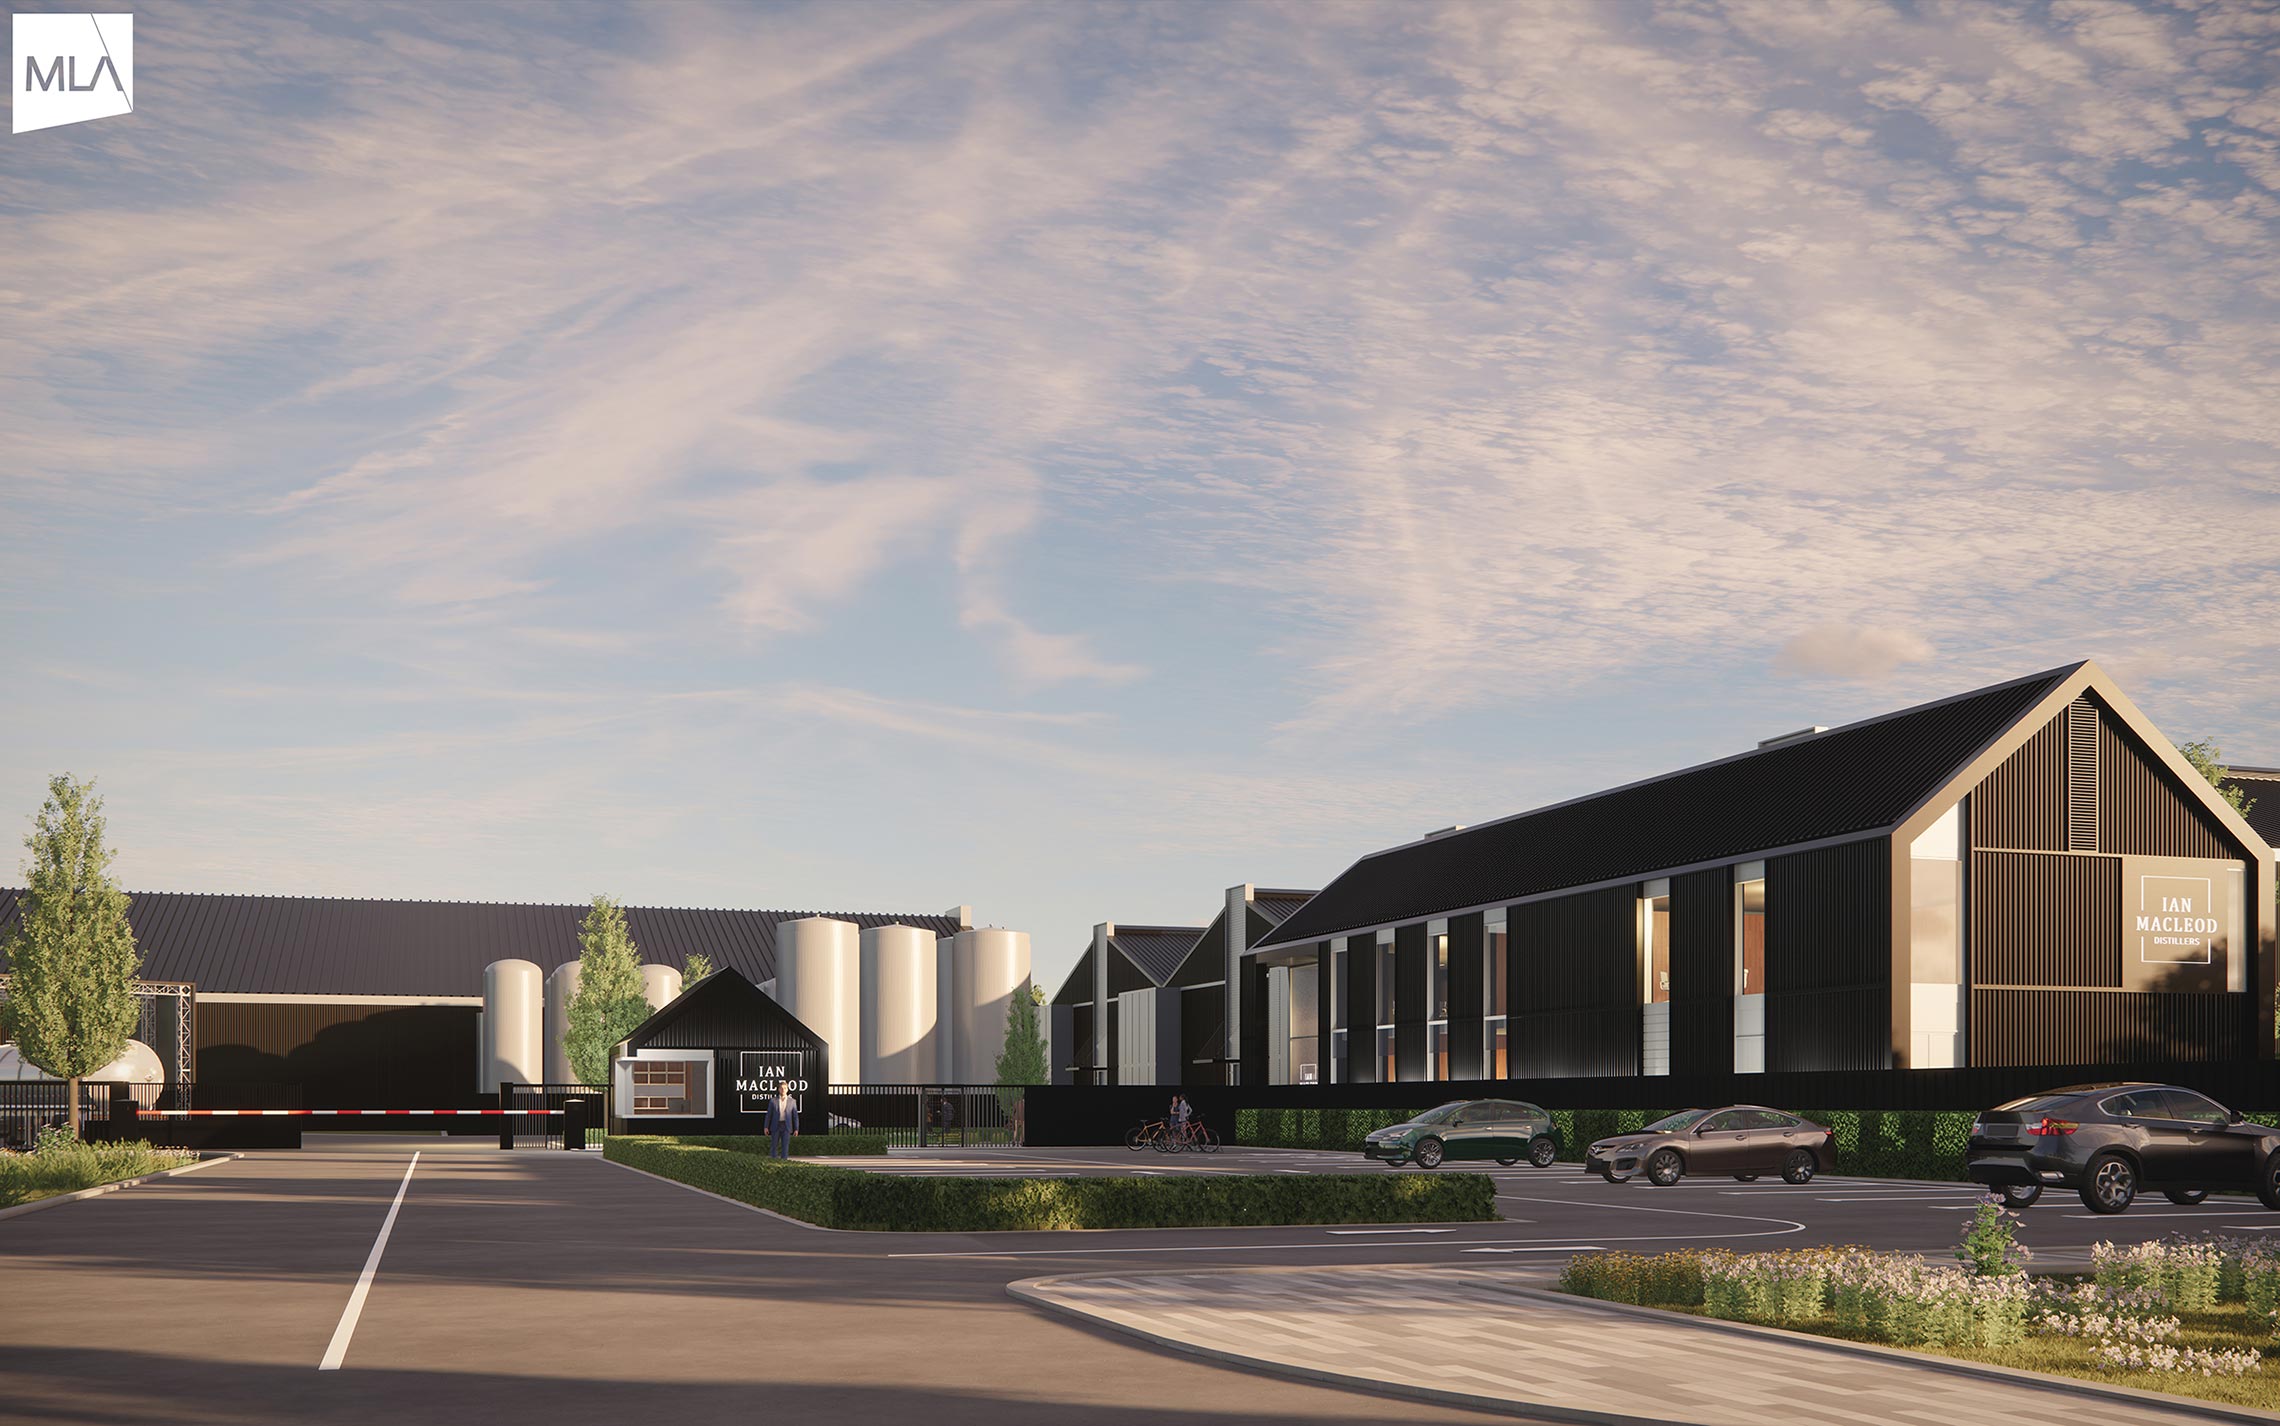 Throsk whisky storage facility recommended for approval